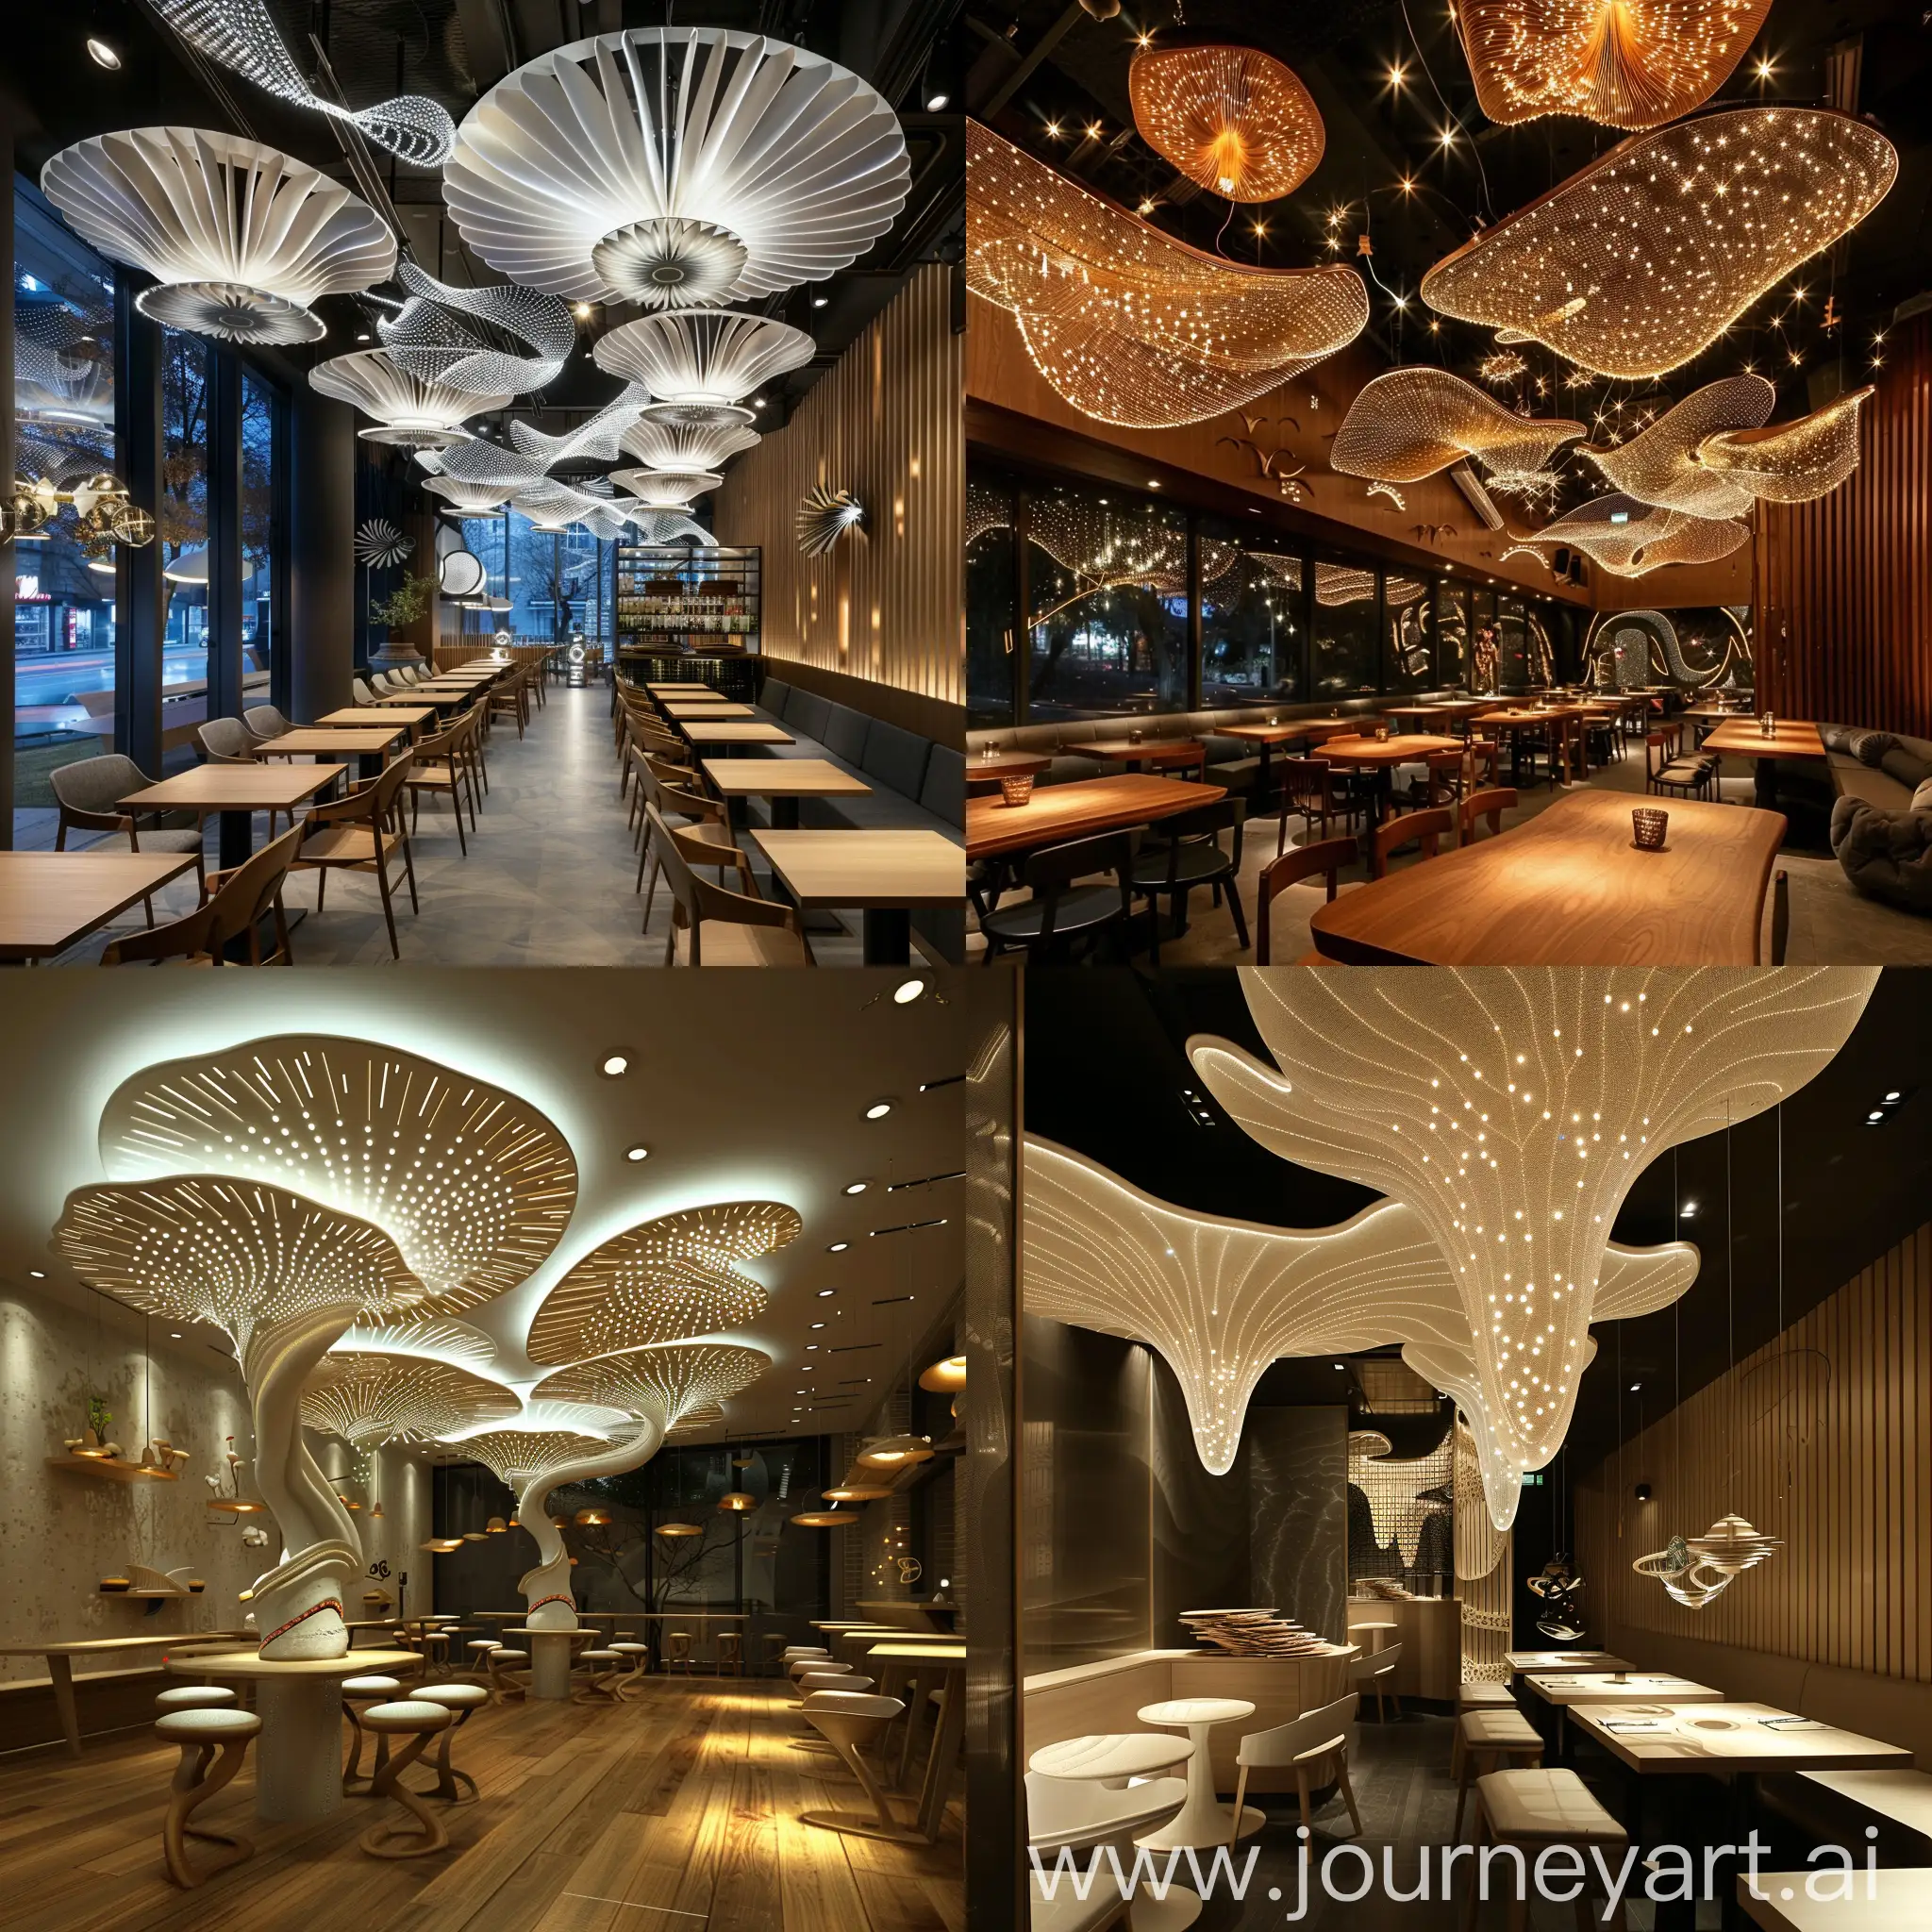 neo-cosmic style restaurant interior, mushroom lamella inspired lights in the celling, kinetic sculpture celling lights 